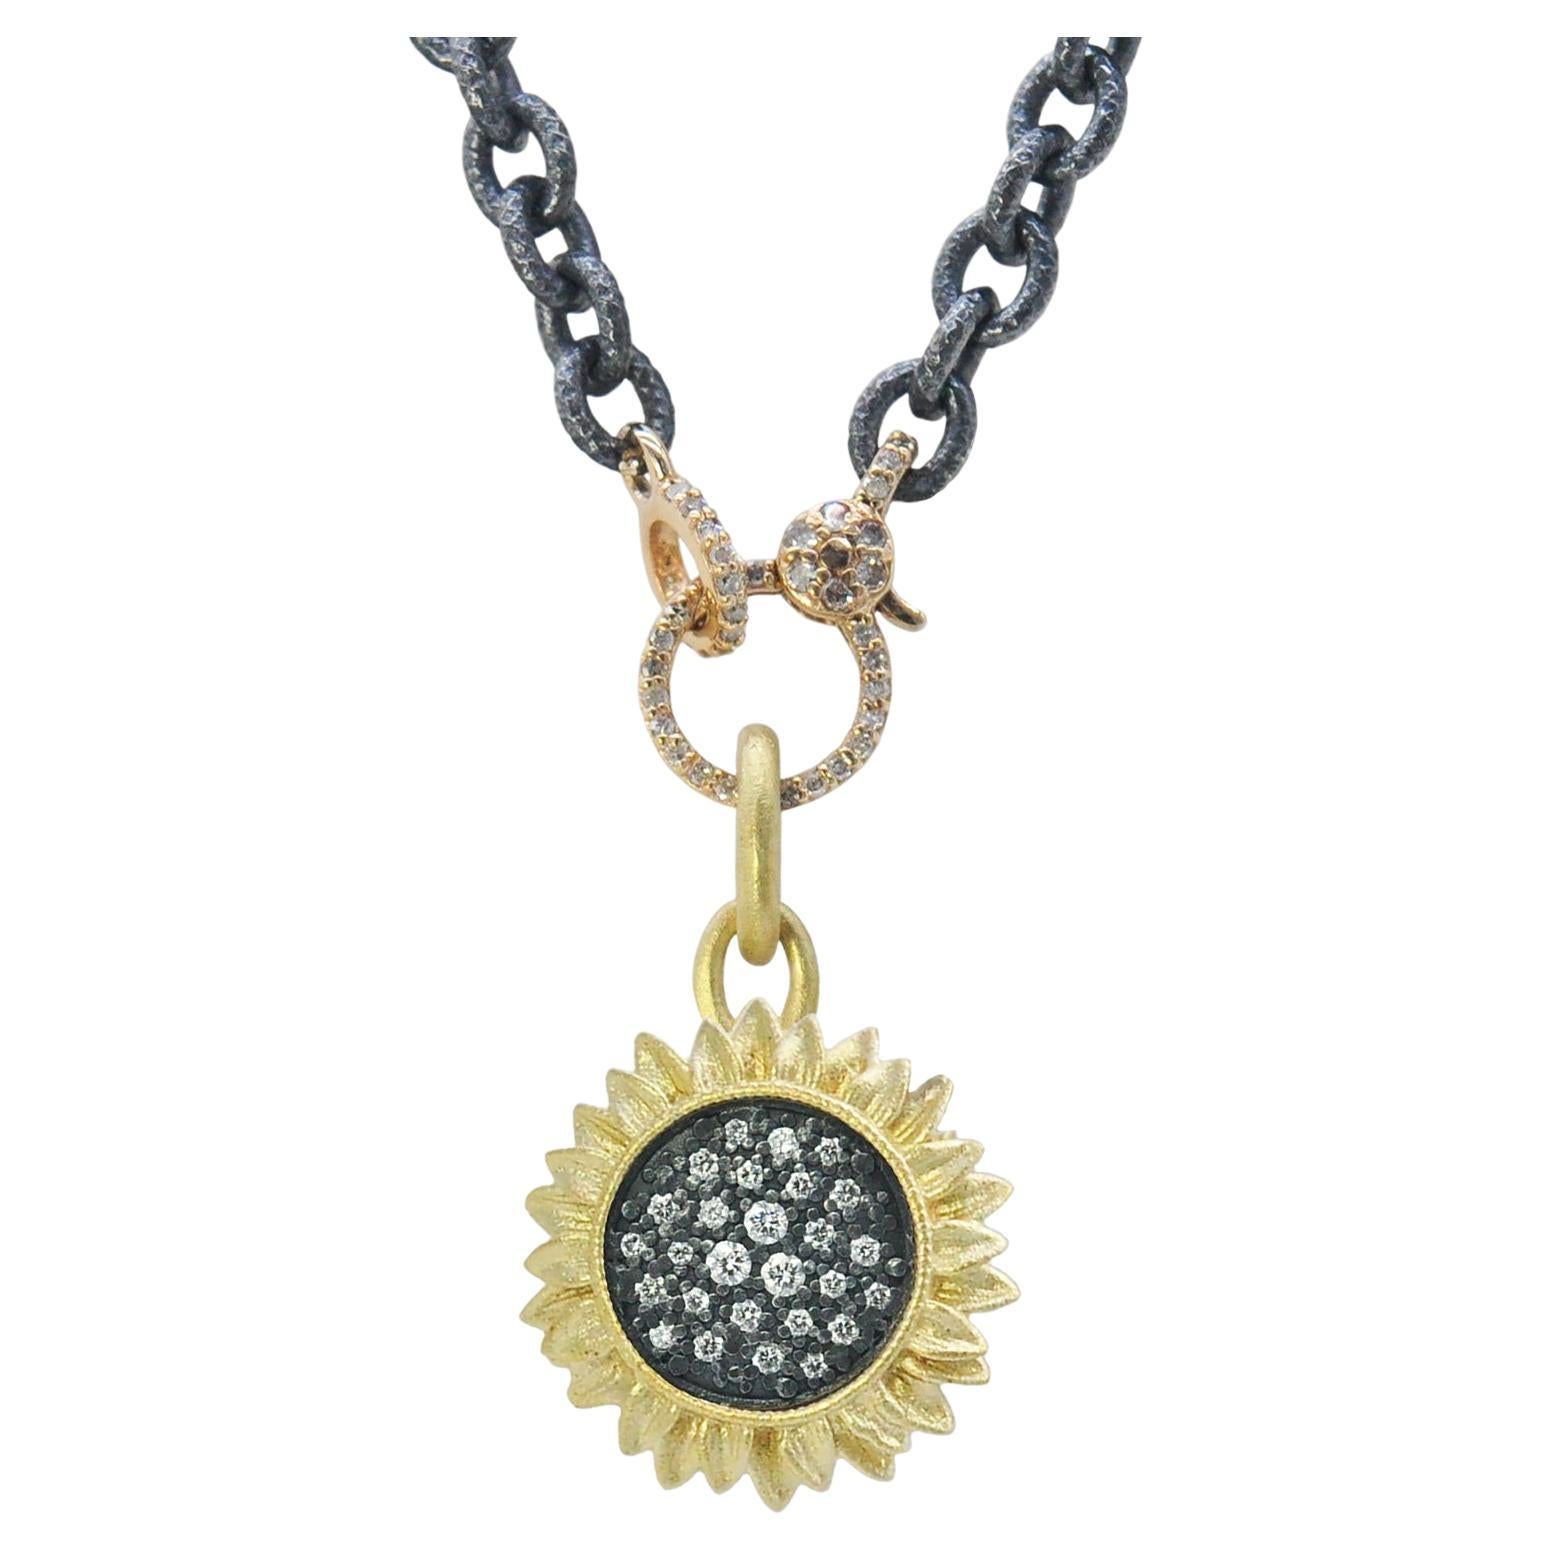 Sunflower Necklace with Pave Set Diamonds in Oxidized Silver with Toggle, Medium For Sale